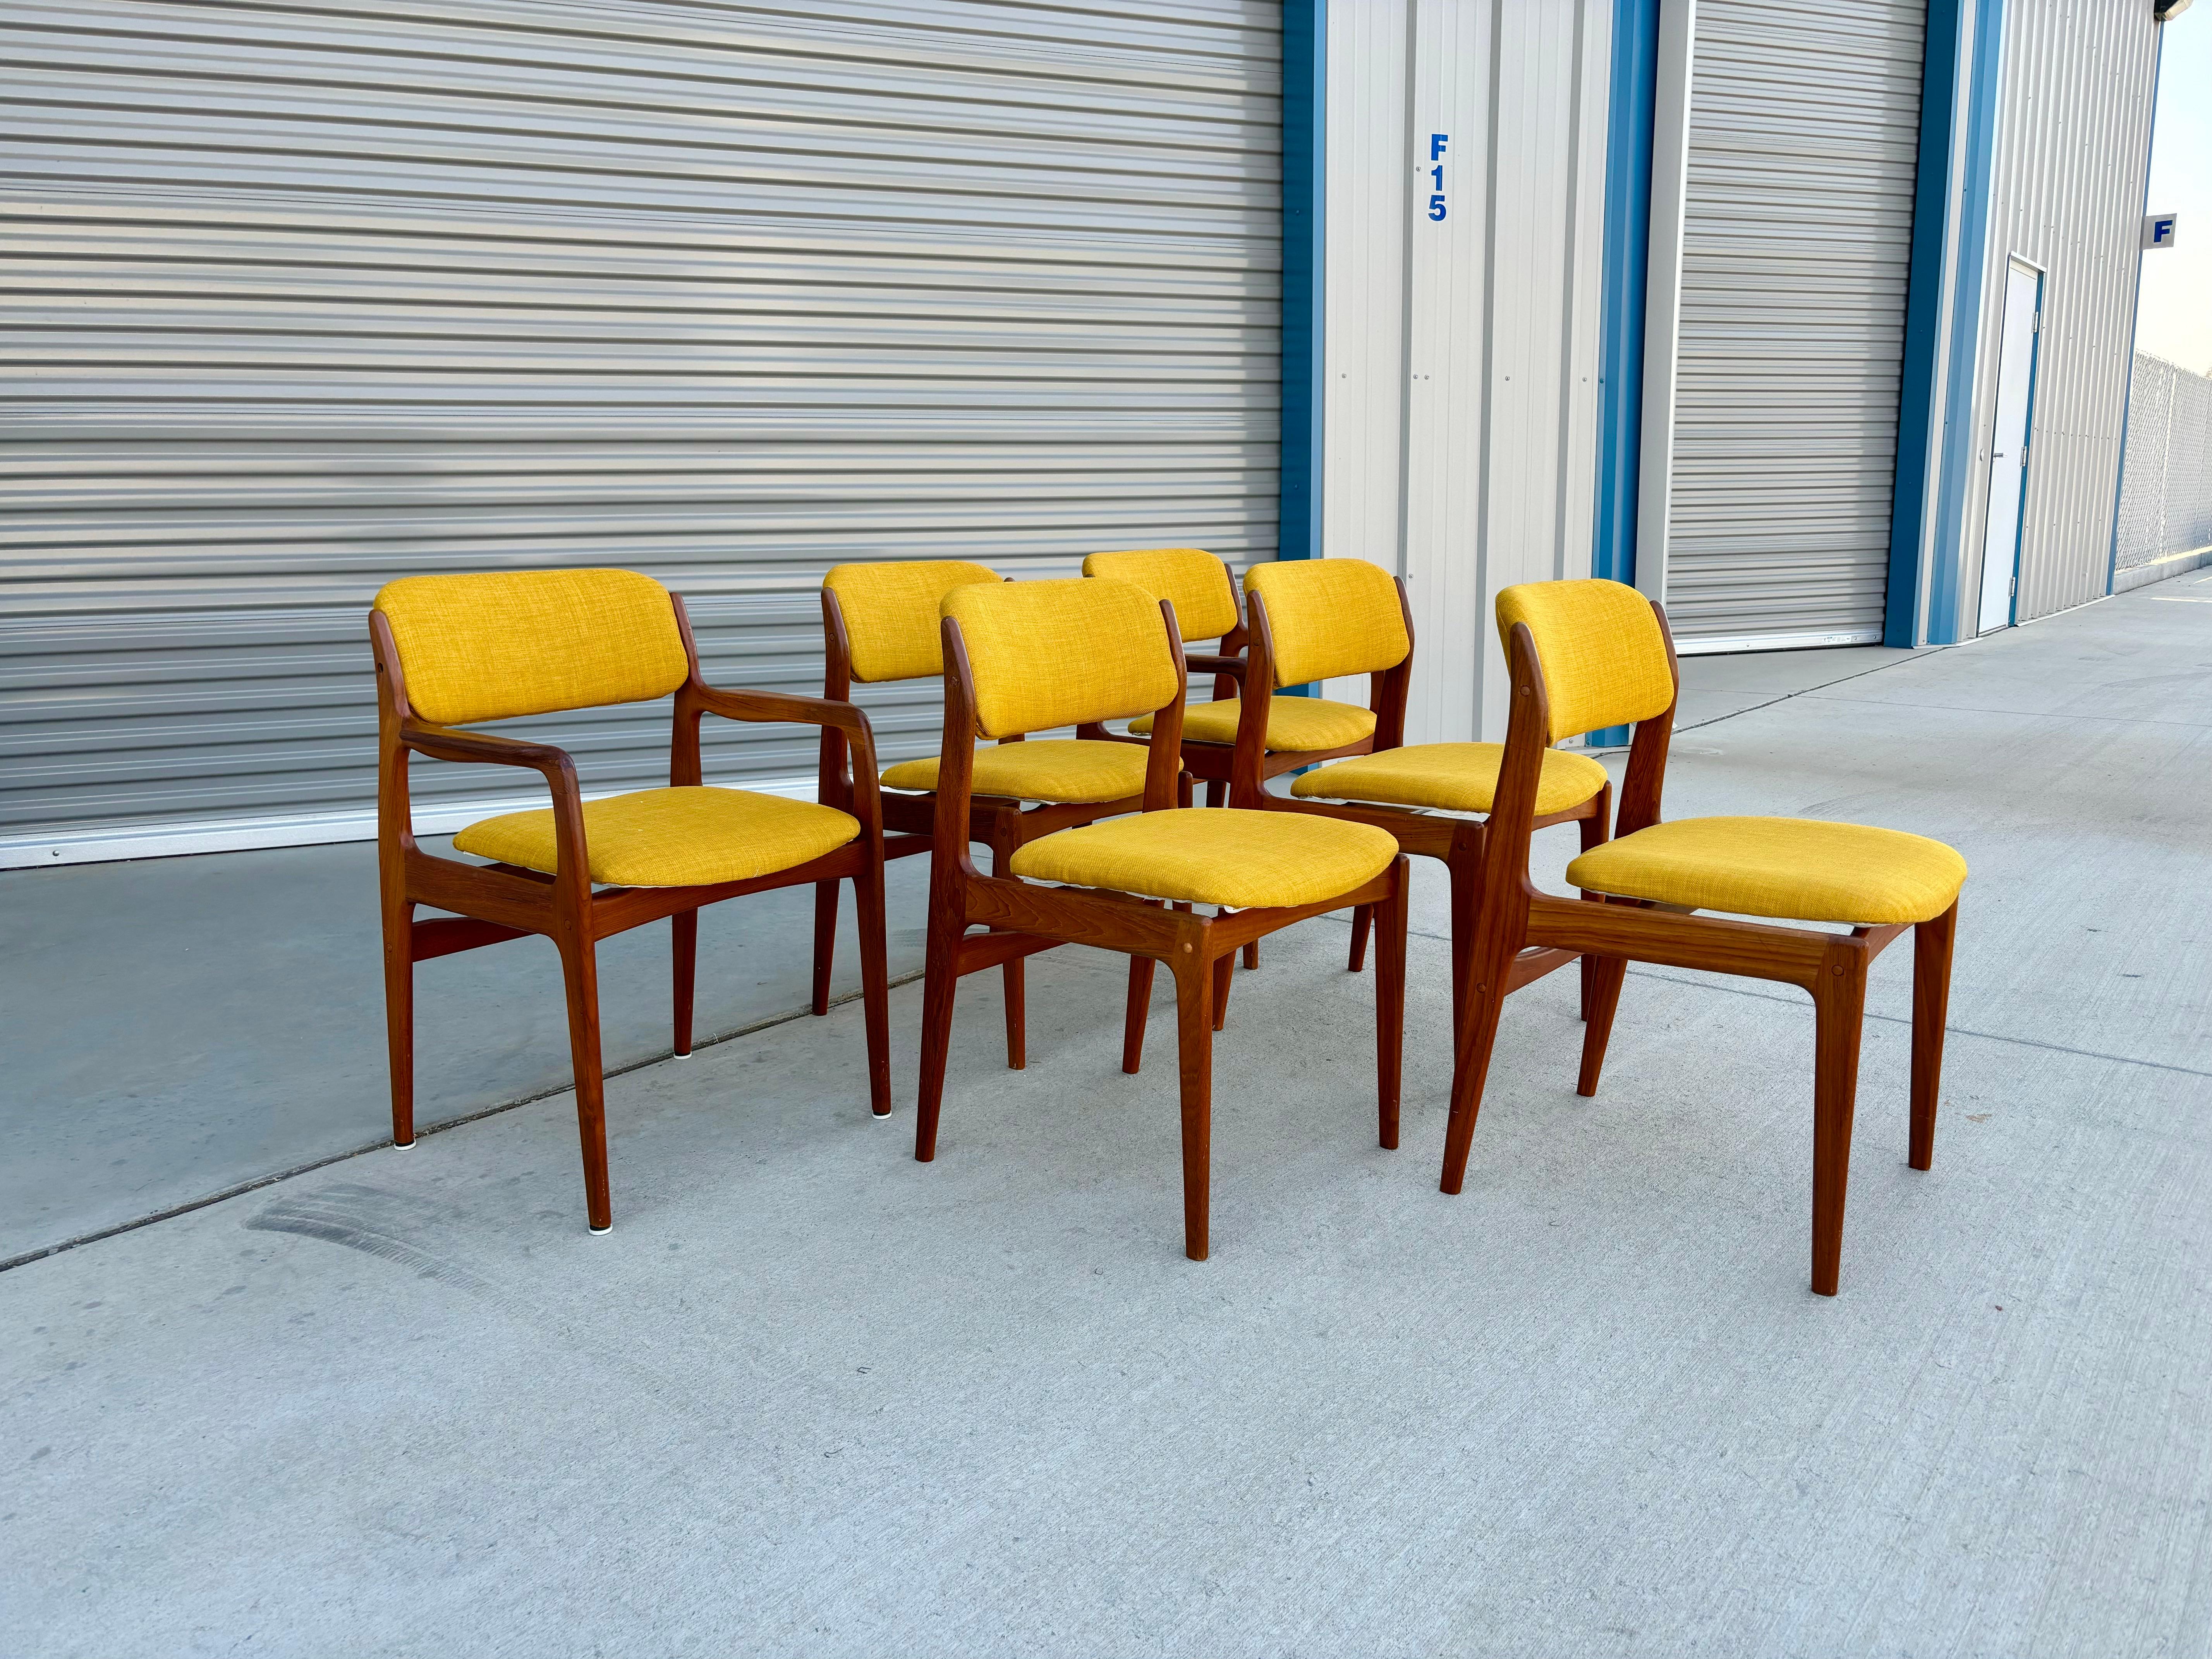 This beautiful mid-century teak dining chair set was designed and manufactured in Denmark circa 1970s. Each chair features a strong, solid teak frame with an excellent color tone and a beautiful grain pattern, creating a refined and elegant look.